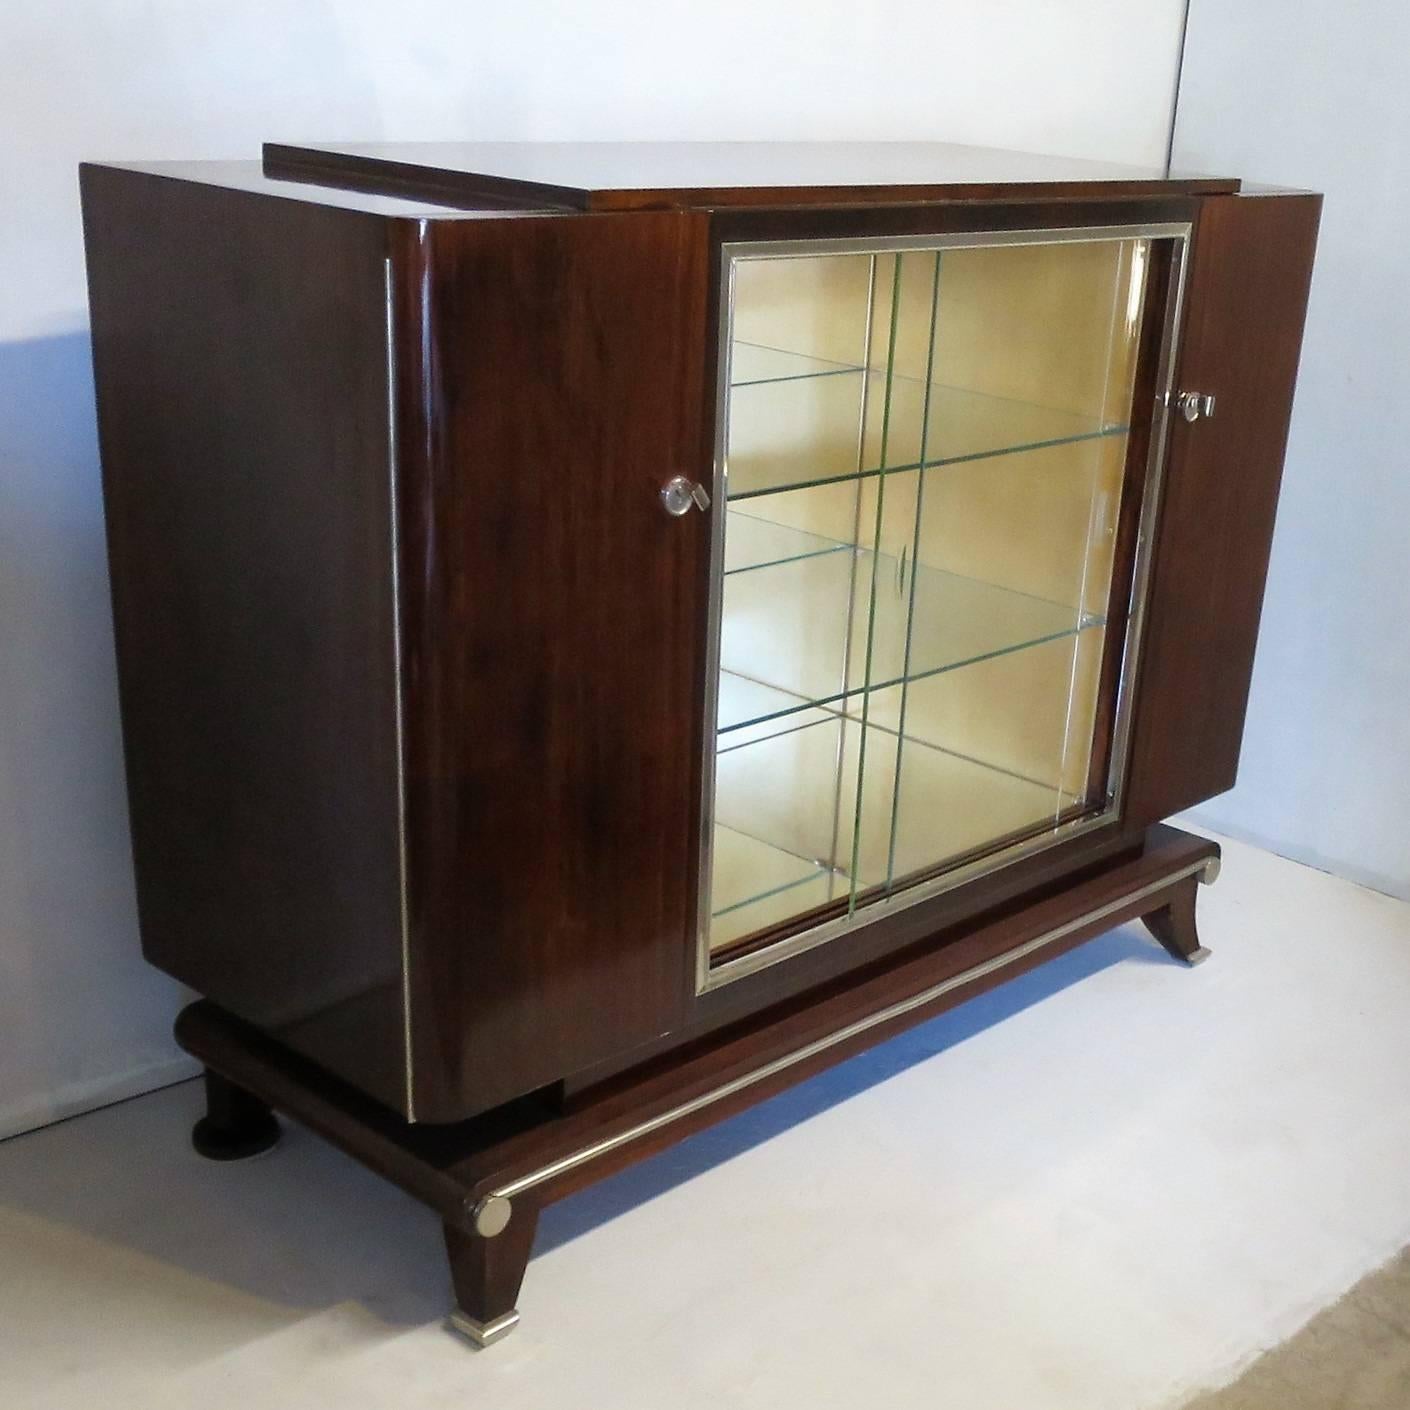 Display cabinet-bar, French Art Deco period, in mahogany, mirrors inside the piece.
The piece is standing on a very elegant design base with curved legs.
Glass shelves inside the middle part, shelves inside both side parts.
This piece more than